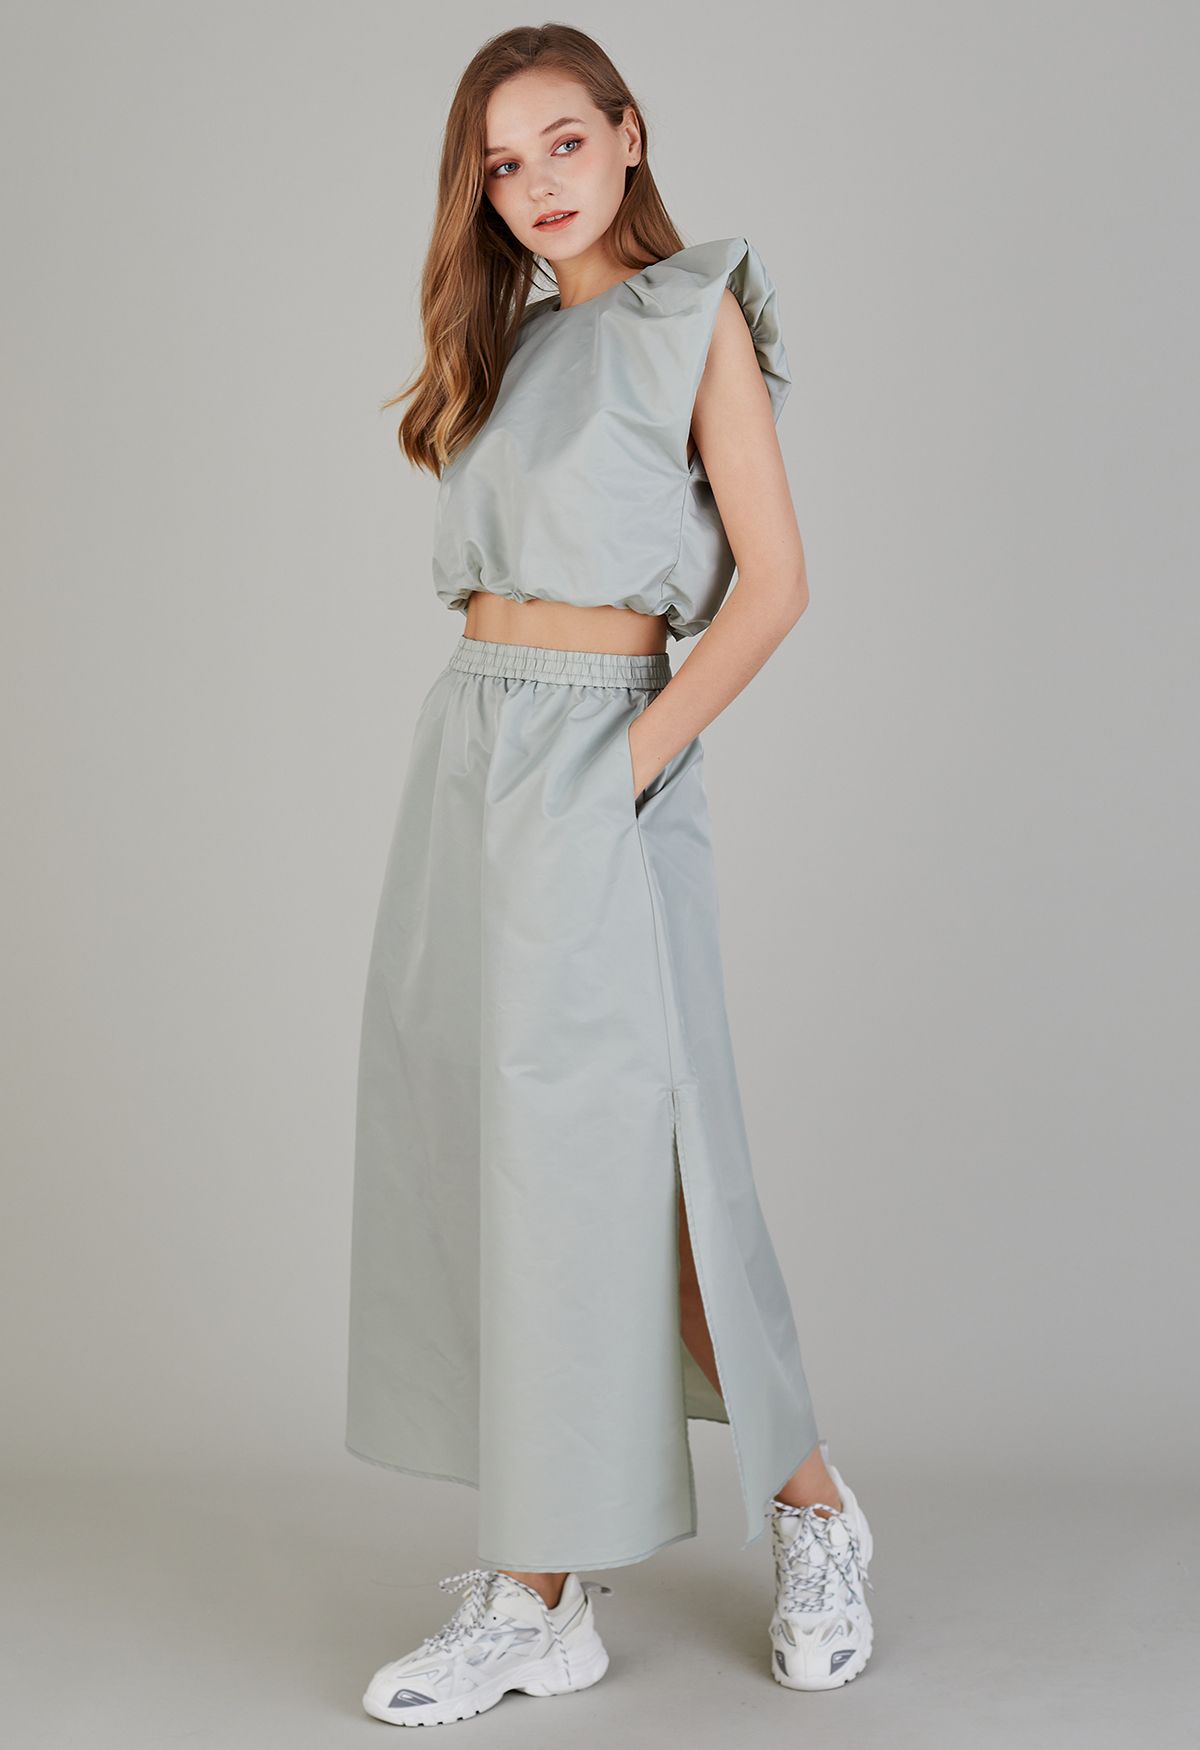 Breezy Bliss Crop Top and Slit Maxi Skirt Set in Pea Green